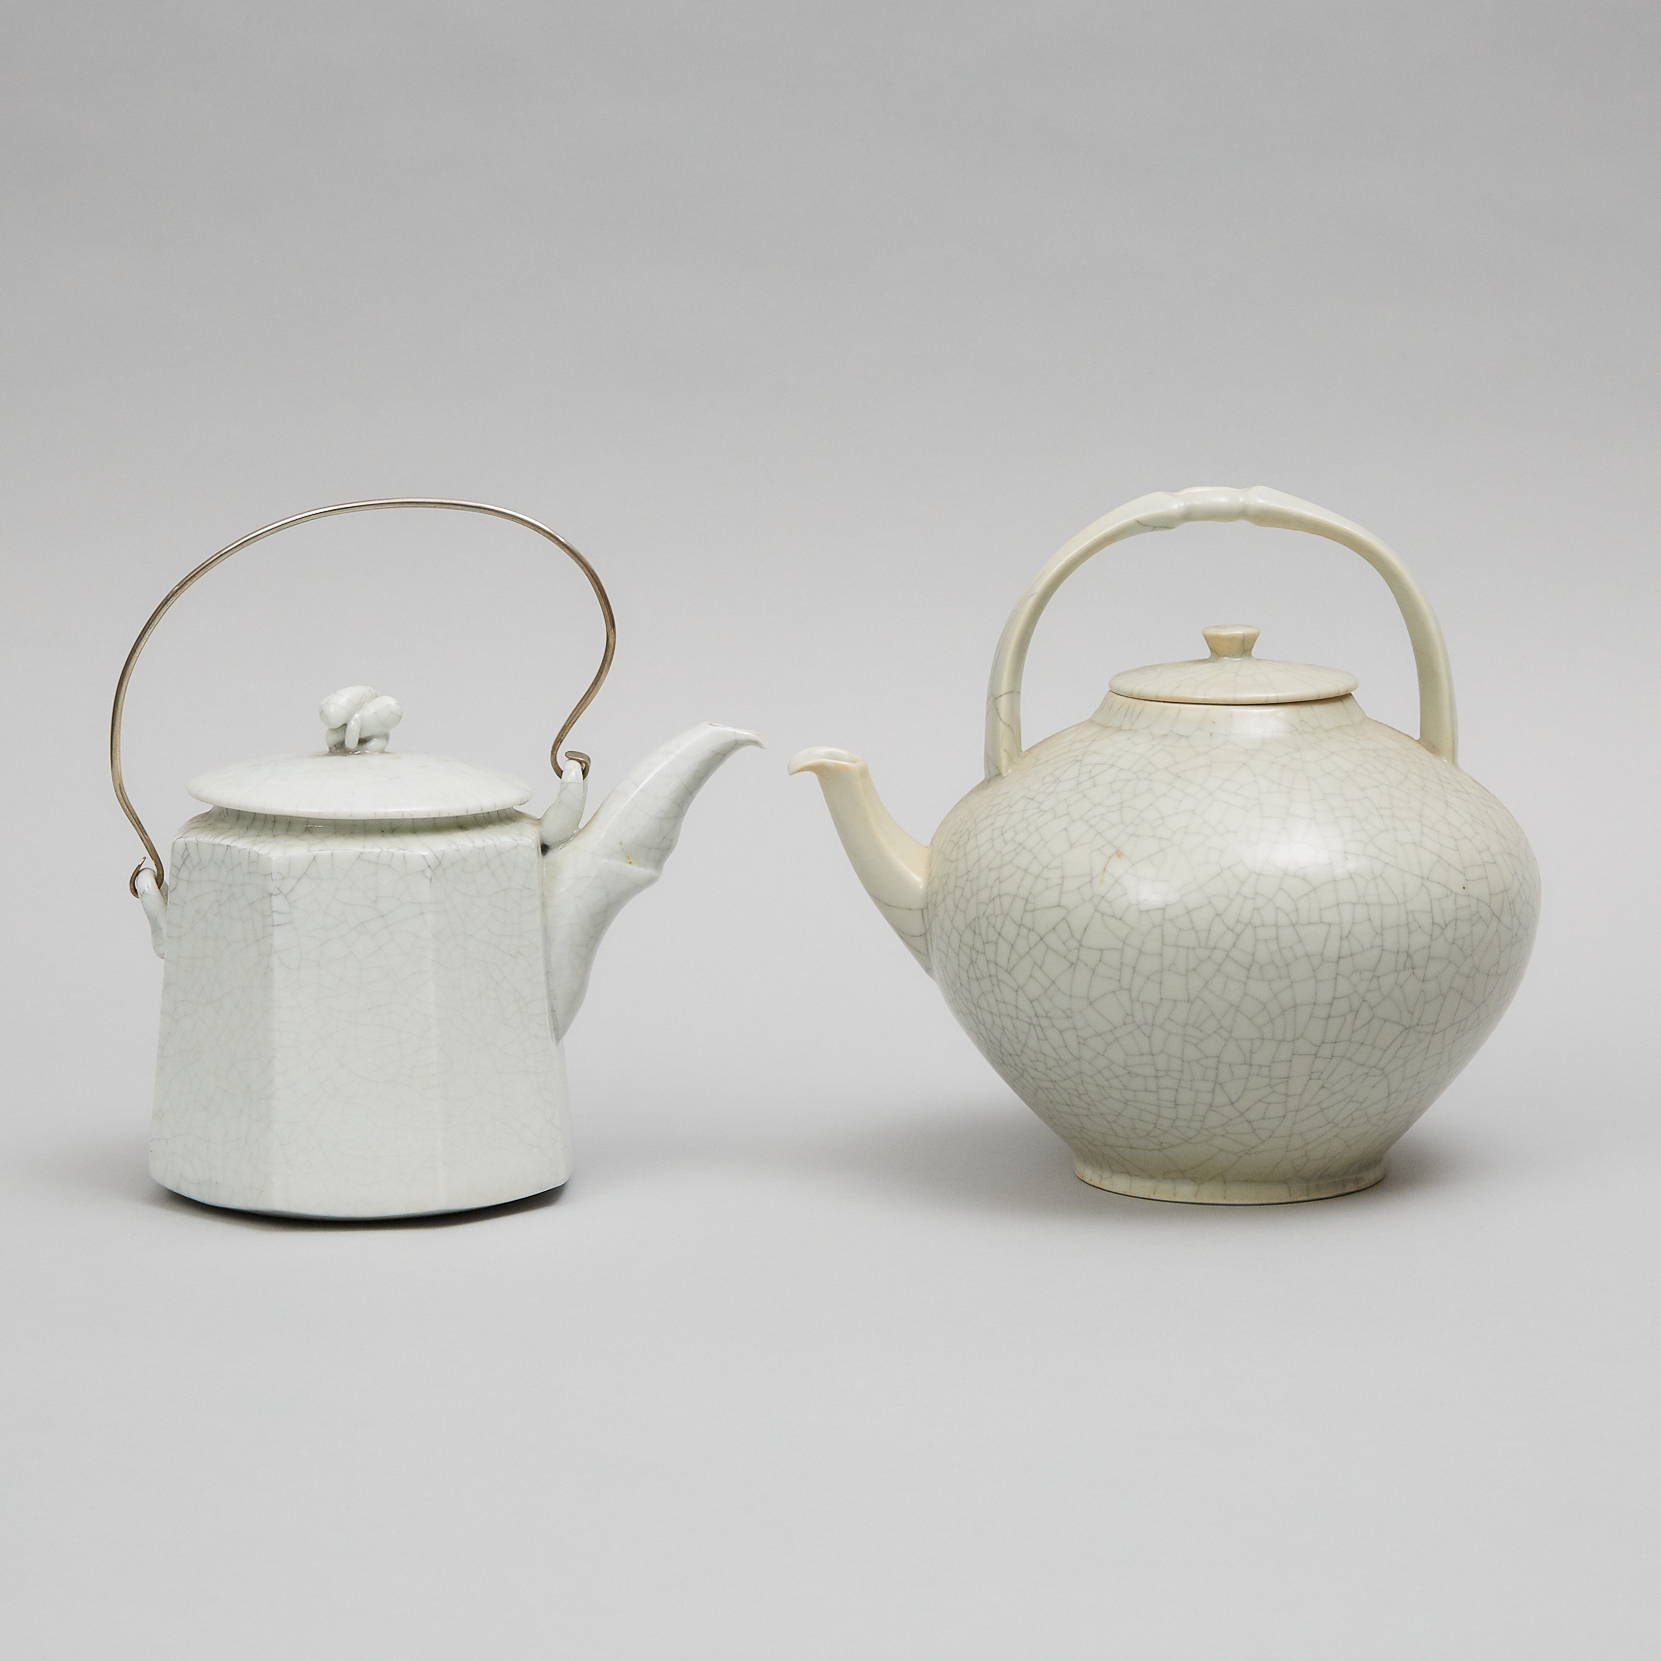 Harlan House (Canadian, b.1943), Two Crackle Glazed Teapots, c.1992